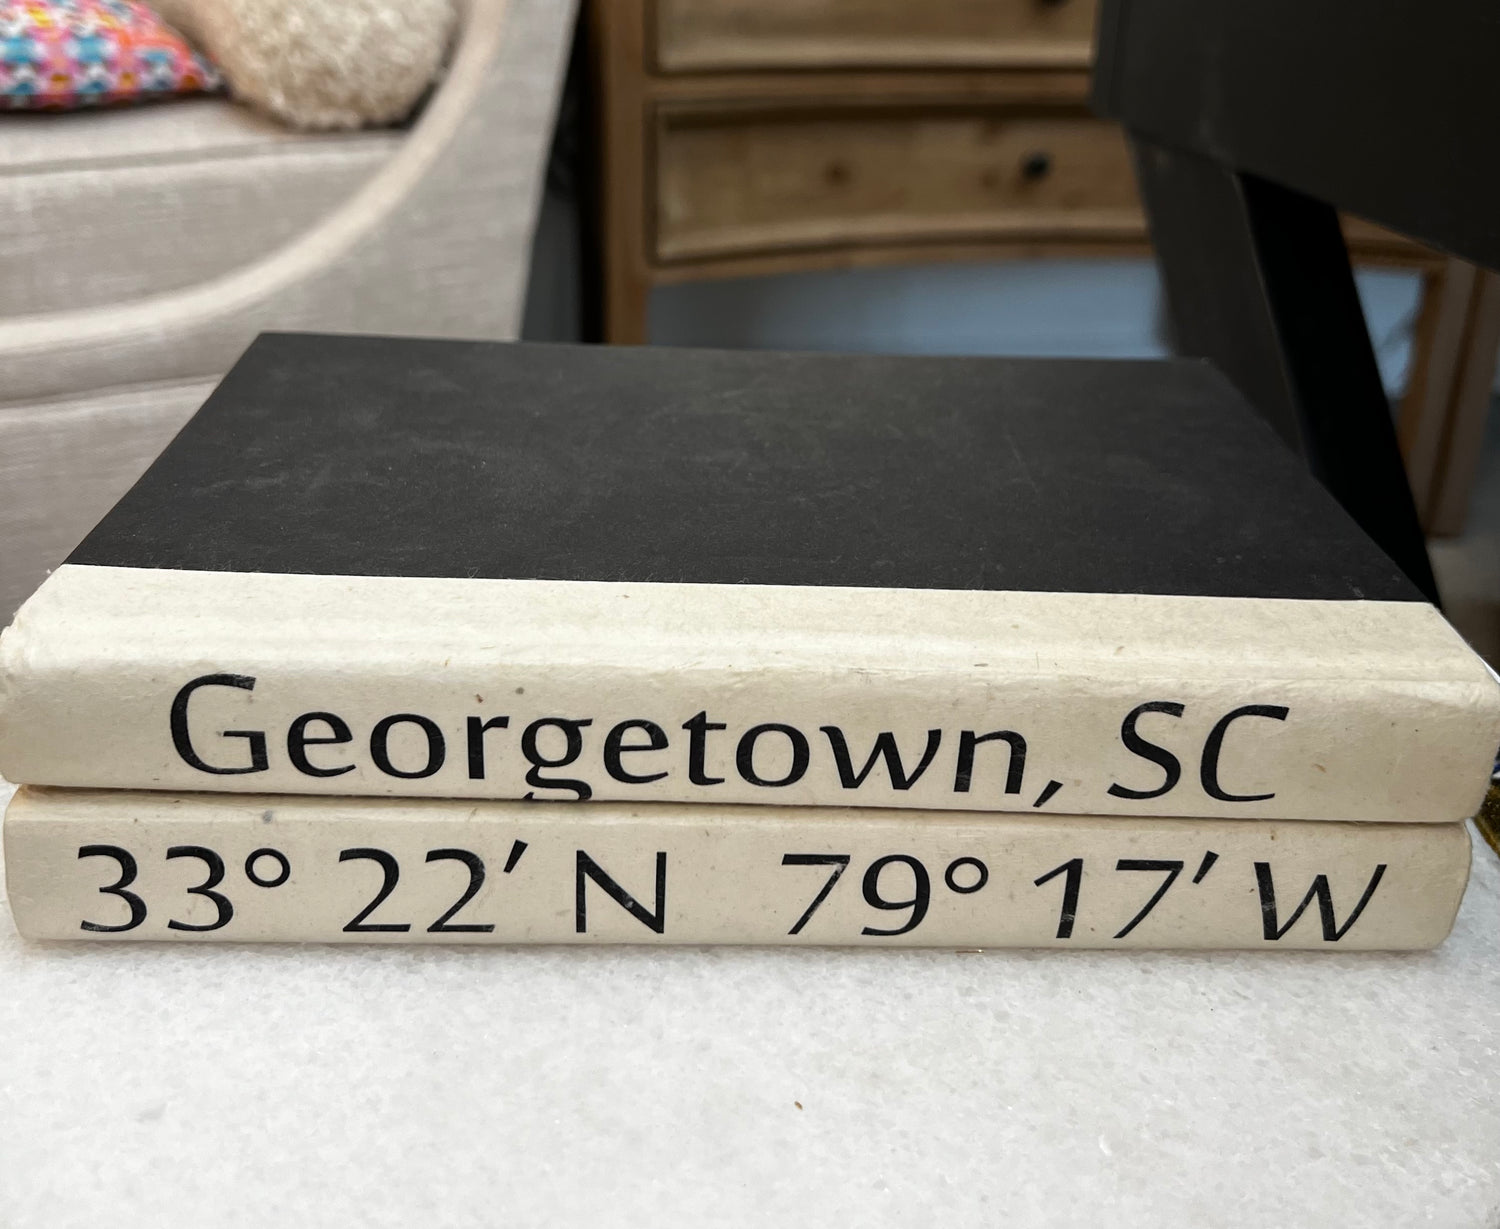 2 Vol City and Coordinates Book - Georgetown, SC